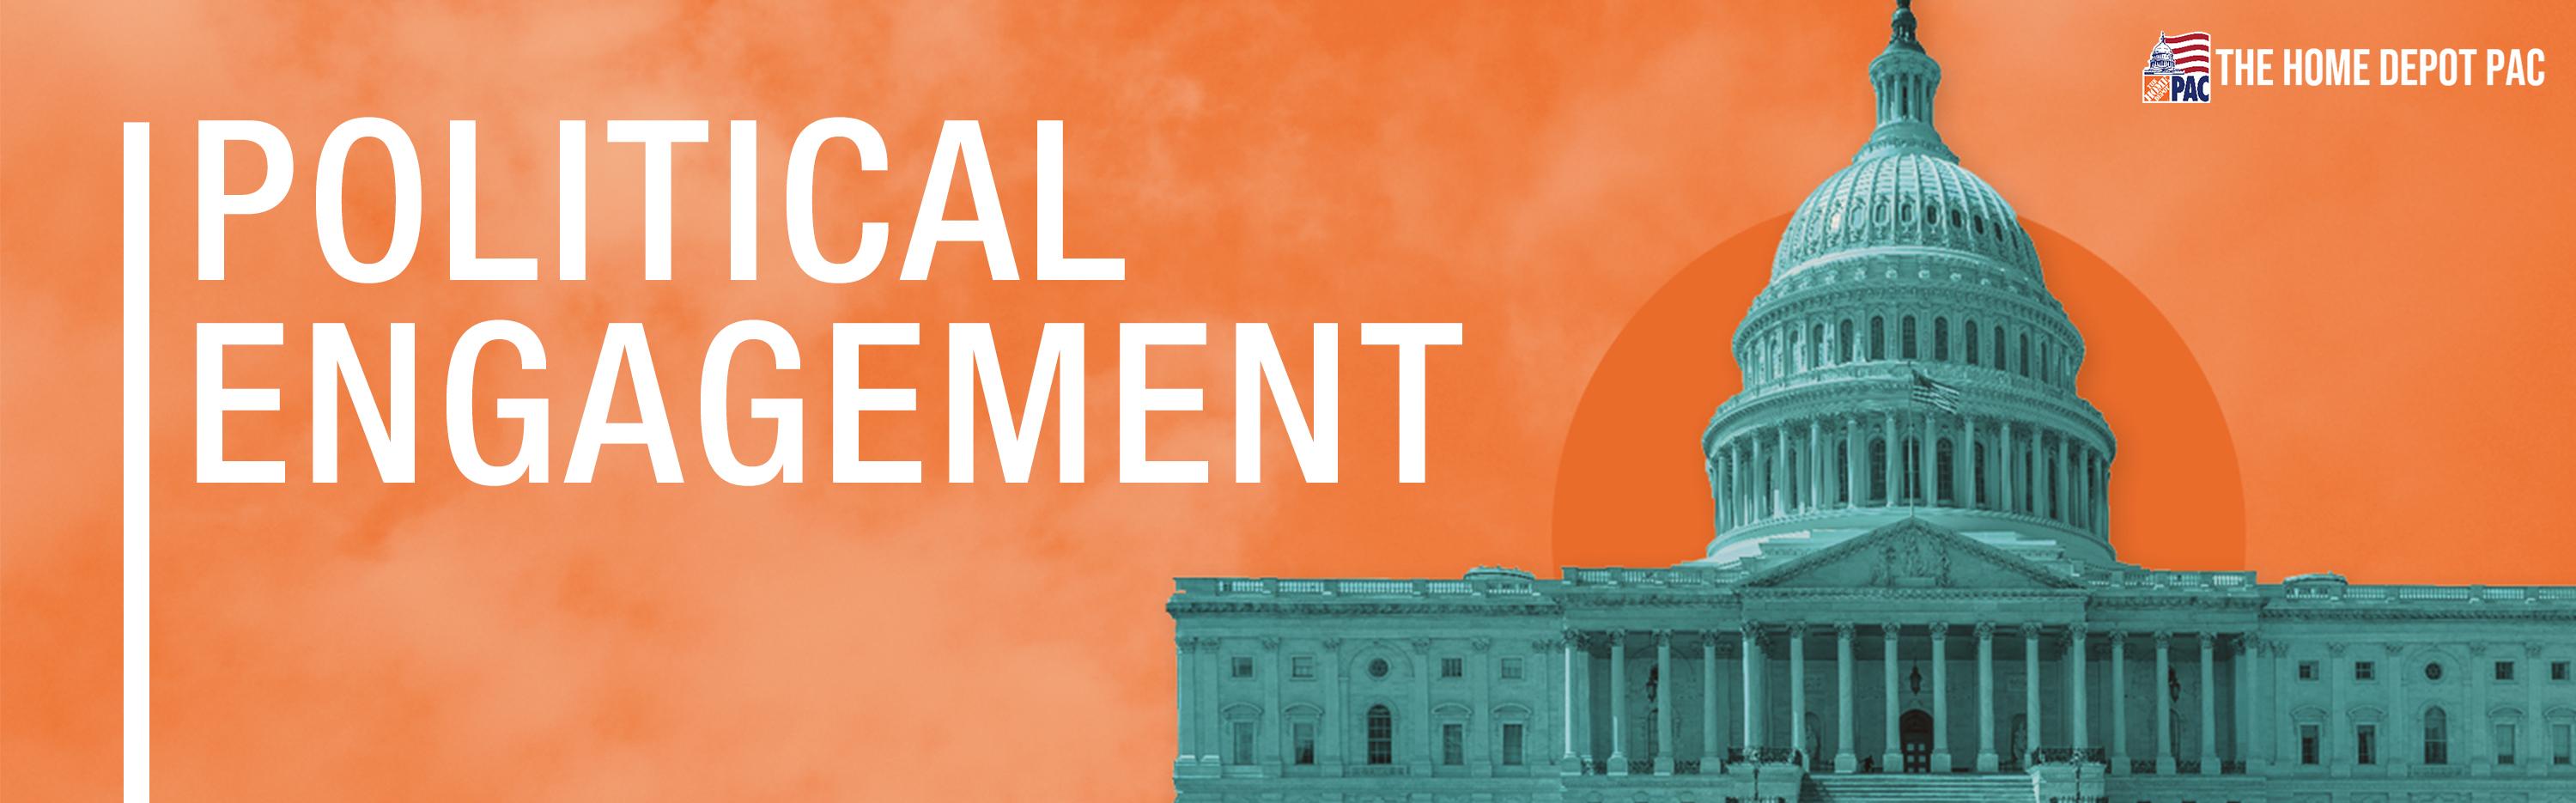 Image of the Capital on an orange background with text that reads: Political Engagement